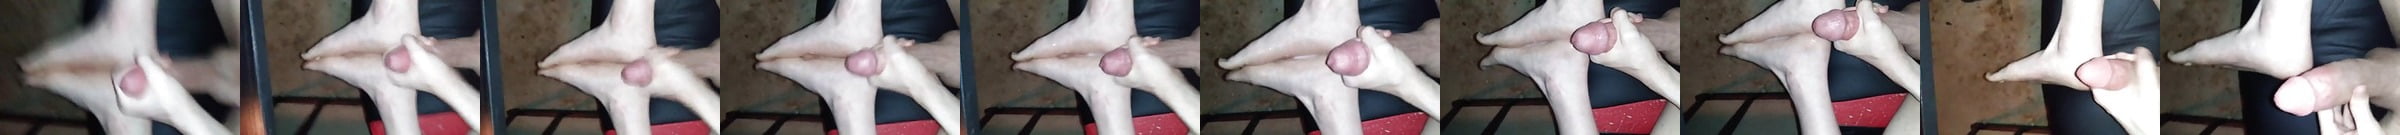 Footfuck Extrem Anal Fat Gay Hd Porn Video 6f Xhamster